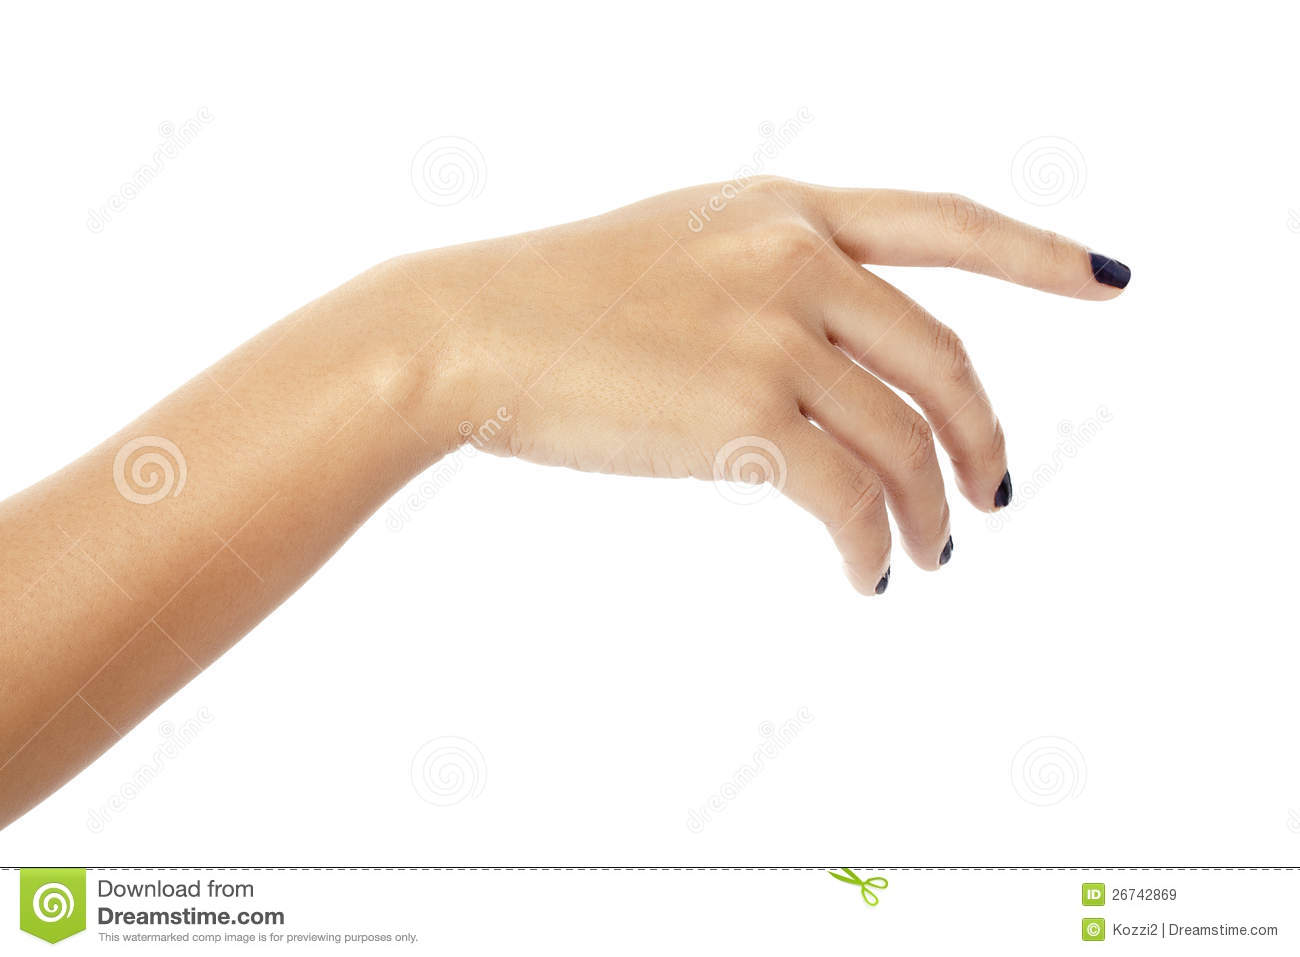 Woman S Hand With Painted Fingernails Pointing With Index Finger